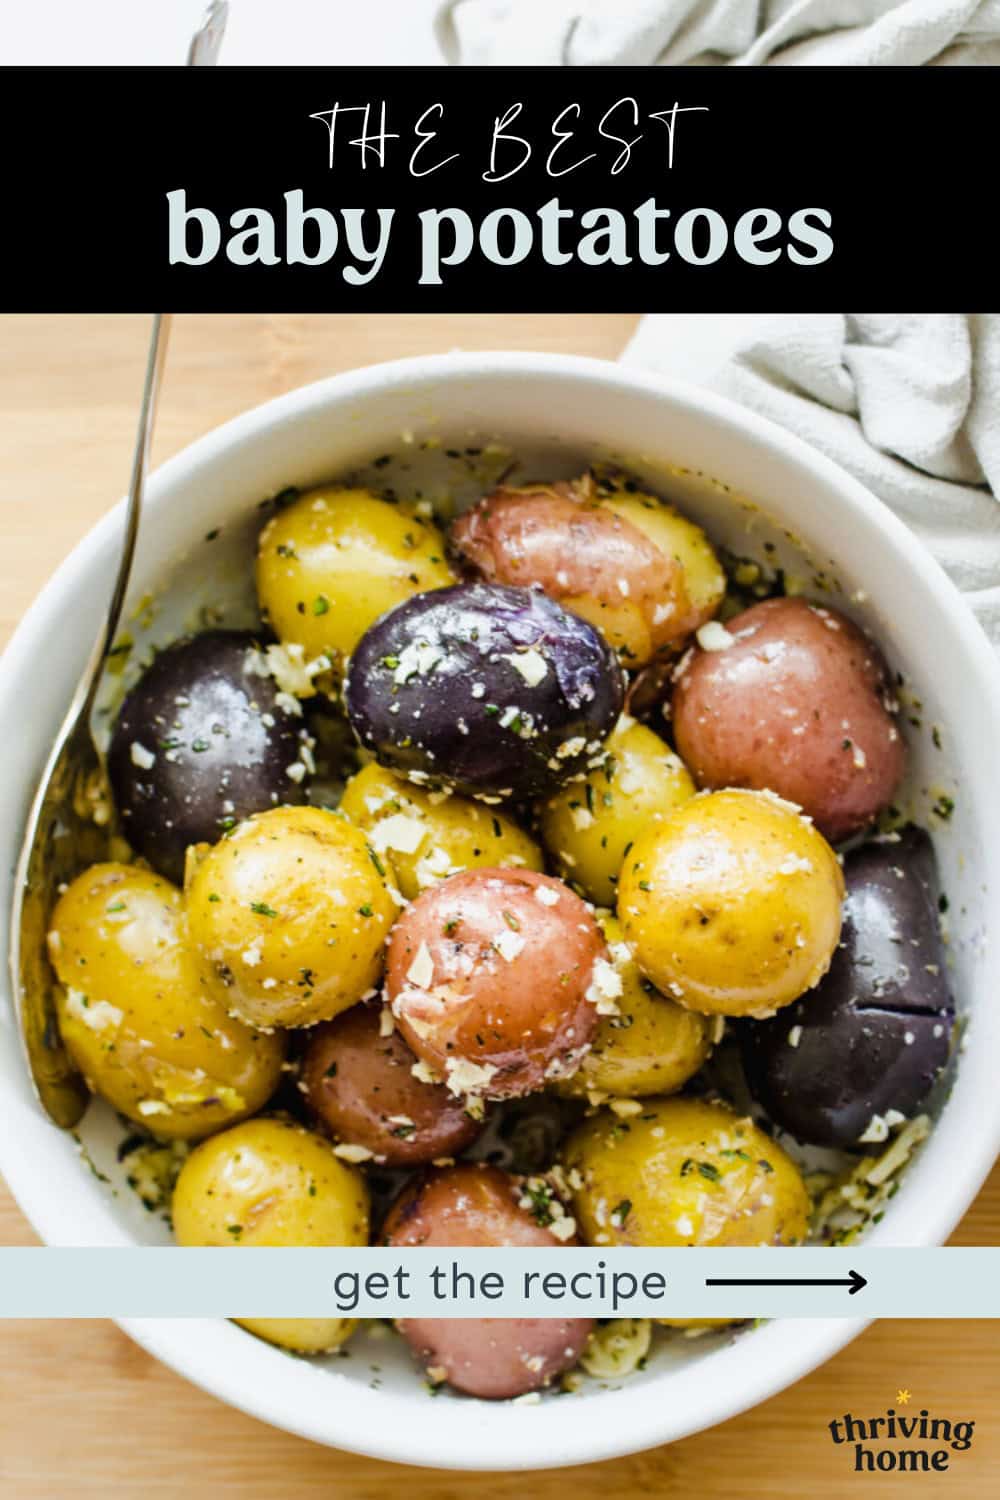 A bowl of red, yellow, and purple baby potatoes with Parmesan and parsley on them.